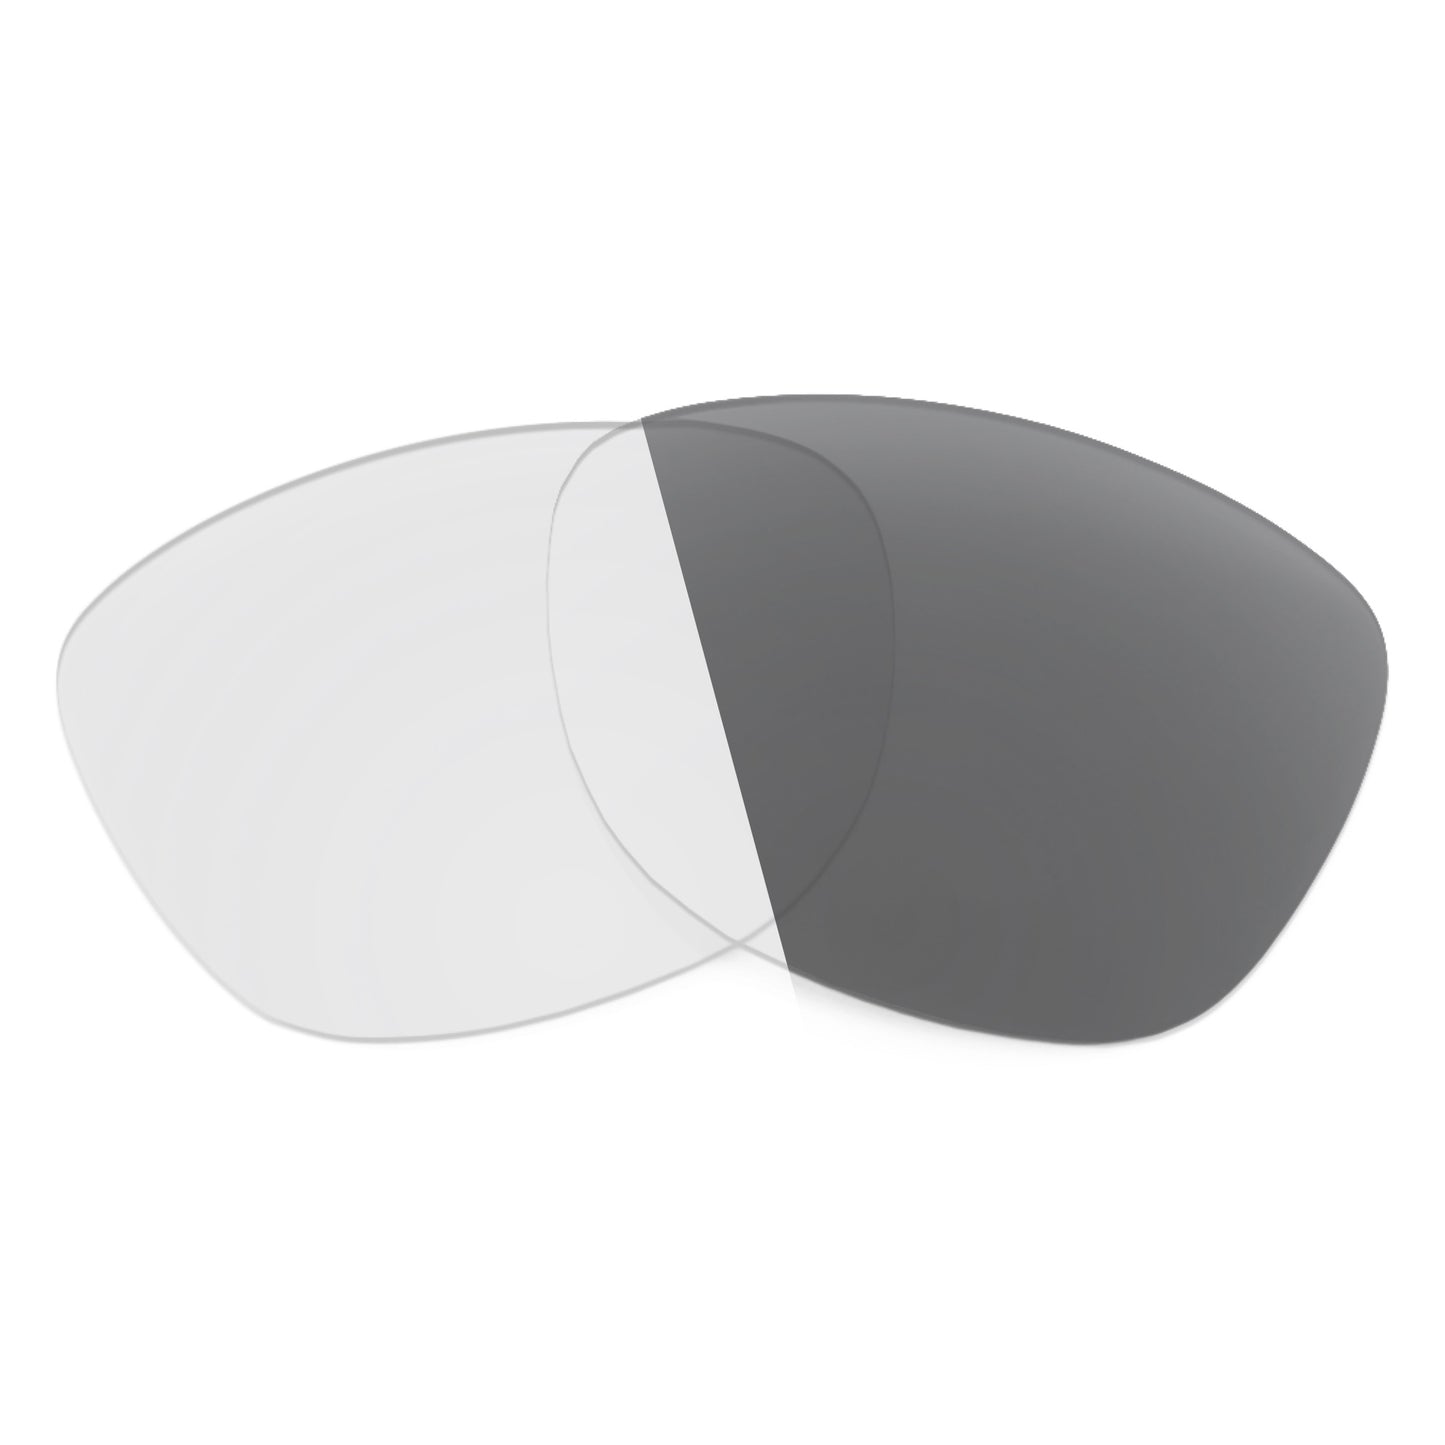 Revant replacement lenses for Ray-Ban Wayfarer Liteforce RB4195 52mm Non-Polarized Adapt Gray Photochromic